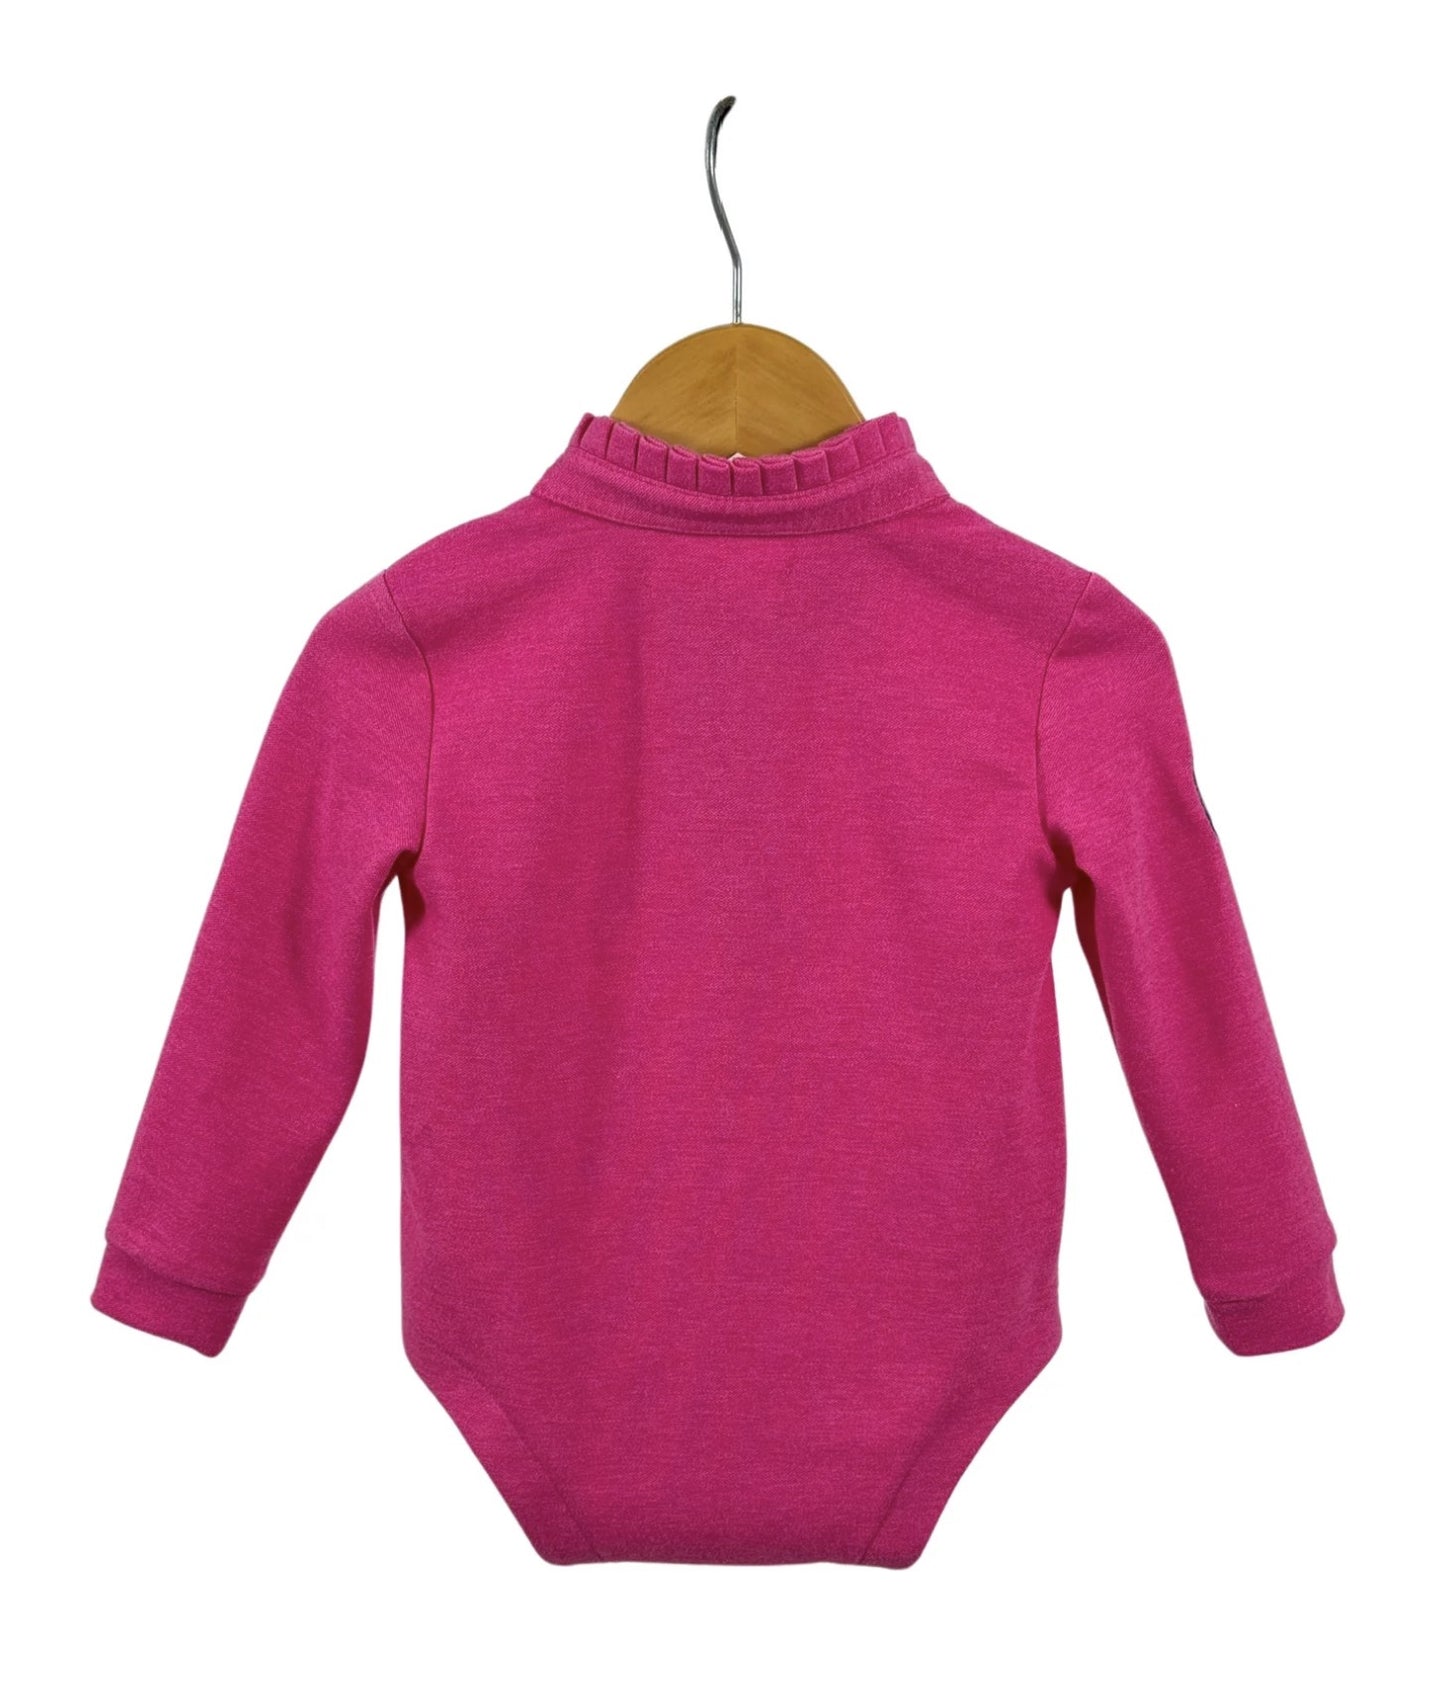 Hallie Baby - Raspberry Pink Contrast Long Sleeve Baby Polo Romper - Baby & Toddler